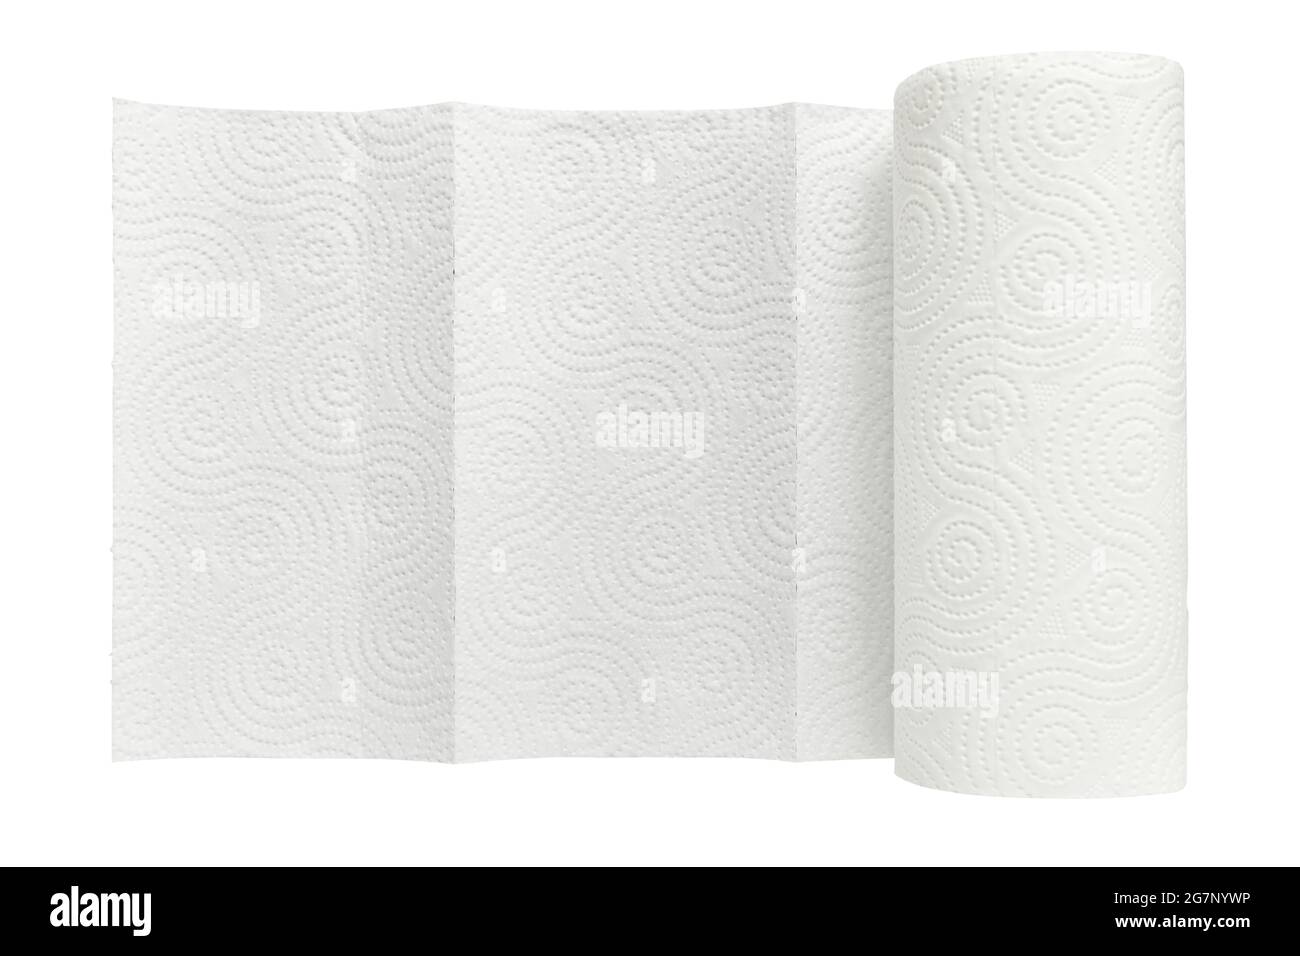 https://c8.alamy.com/comp/2G7NYWP/white-roll-of-household-paper-towels-isolated-on-white-background-close-up-2G7NYWP.jpg